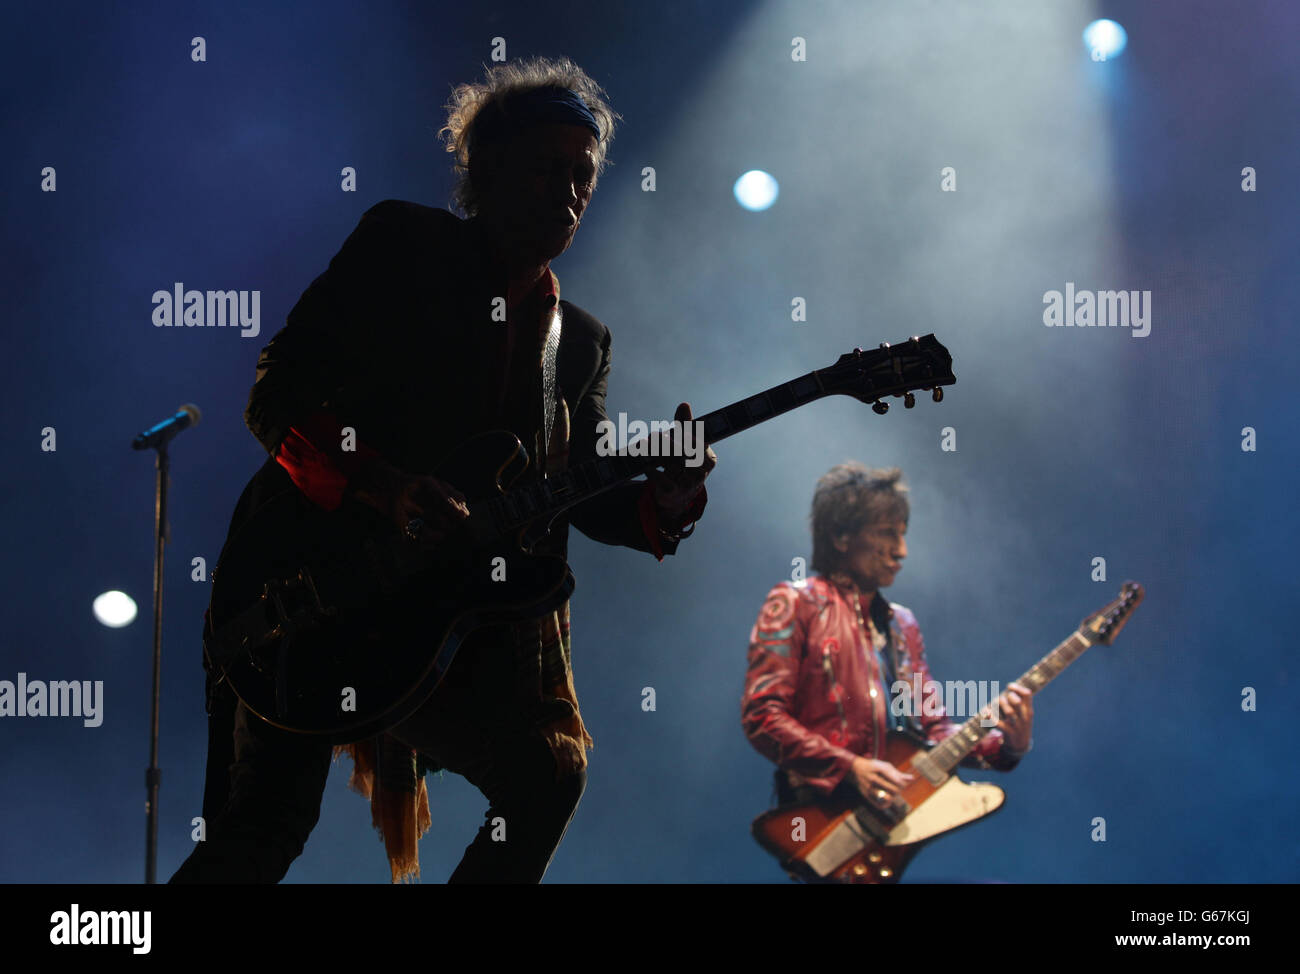 Keith Richards with Ronnie Wood (right) from the Rolling Stones perform on the Pyramid Stage during the second performance day of the Glastonbury 2013 Festival of Contemporary Performing Arts at Pilton Farm, Somerset. Stock Photo